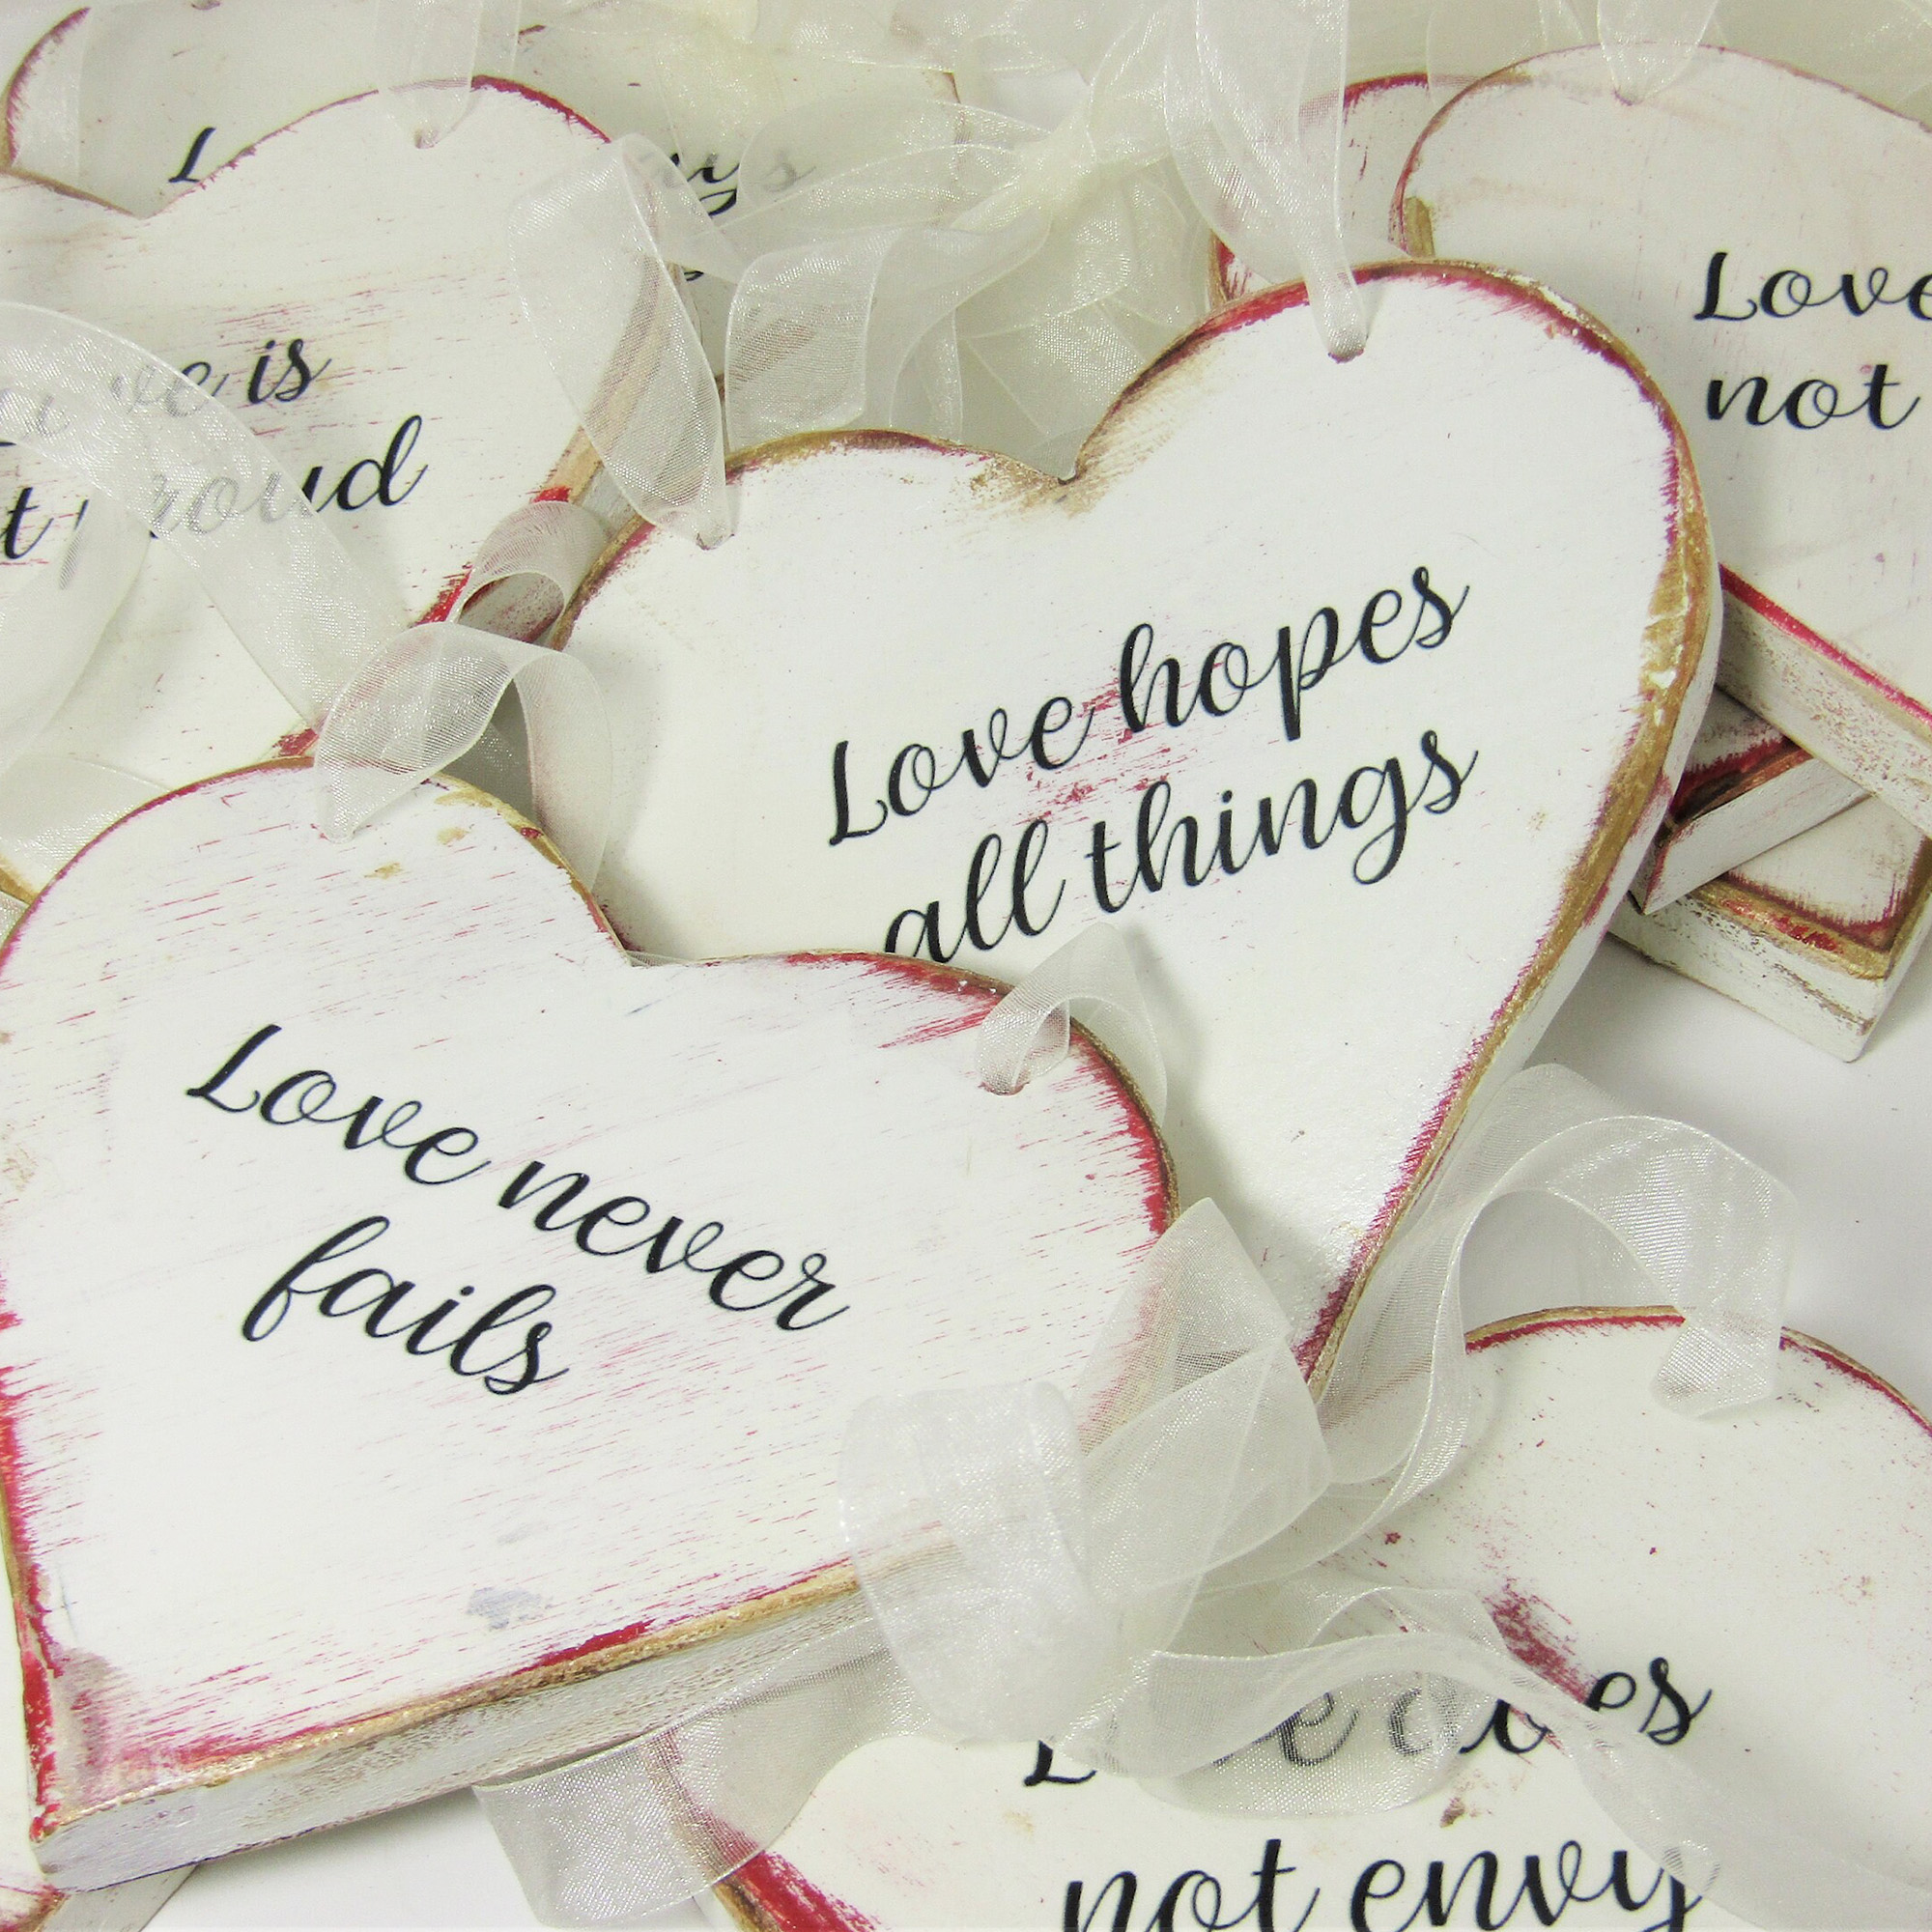 24 Pieces Valentine's Day Wood Heart Shaped Ornaments Wooden Heart Embellishments Wooden Heart Shaped Signs Hanging Heart Tags for Gifts Wedding